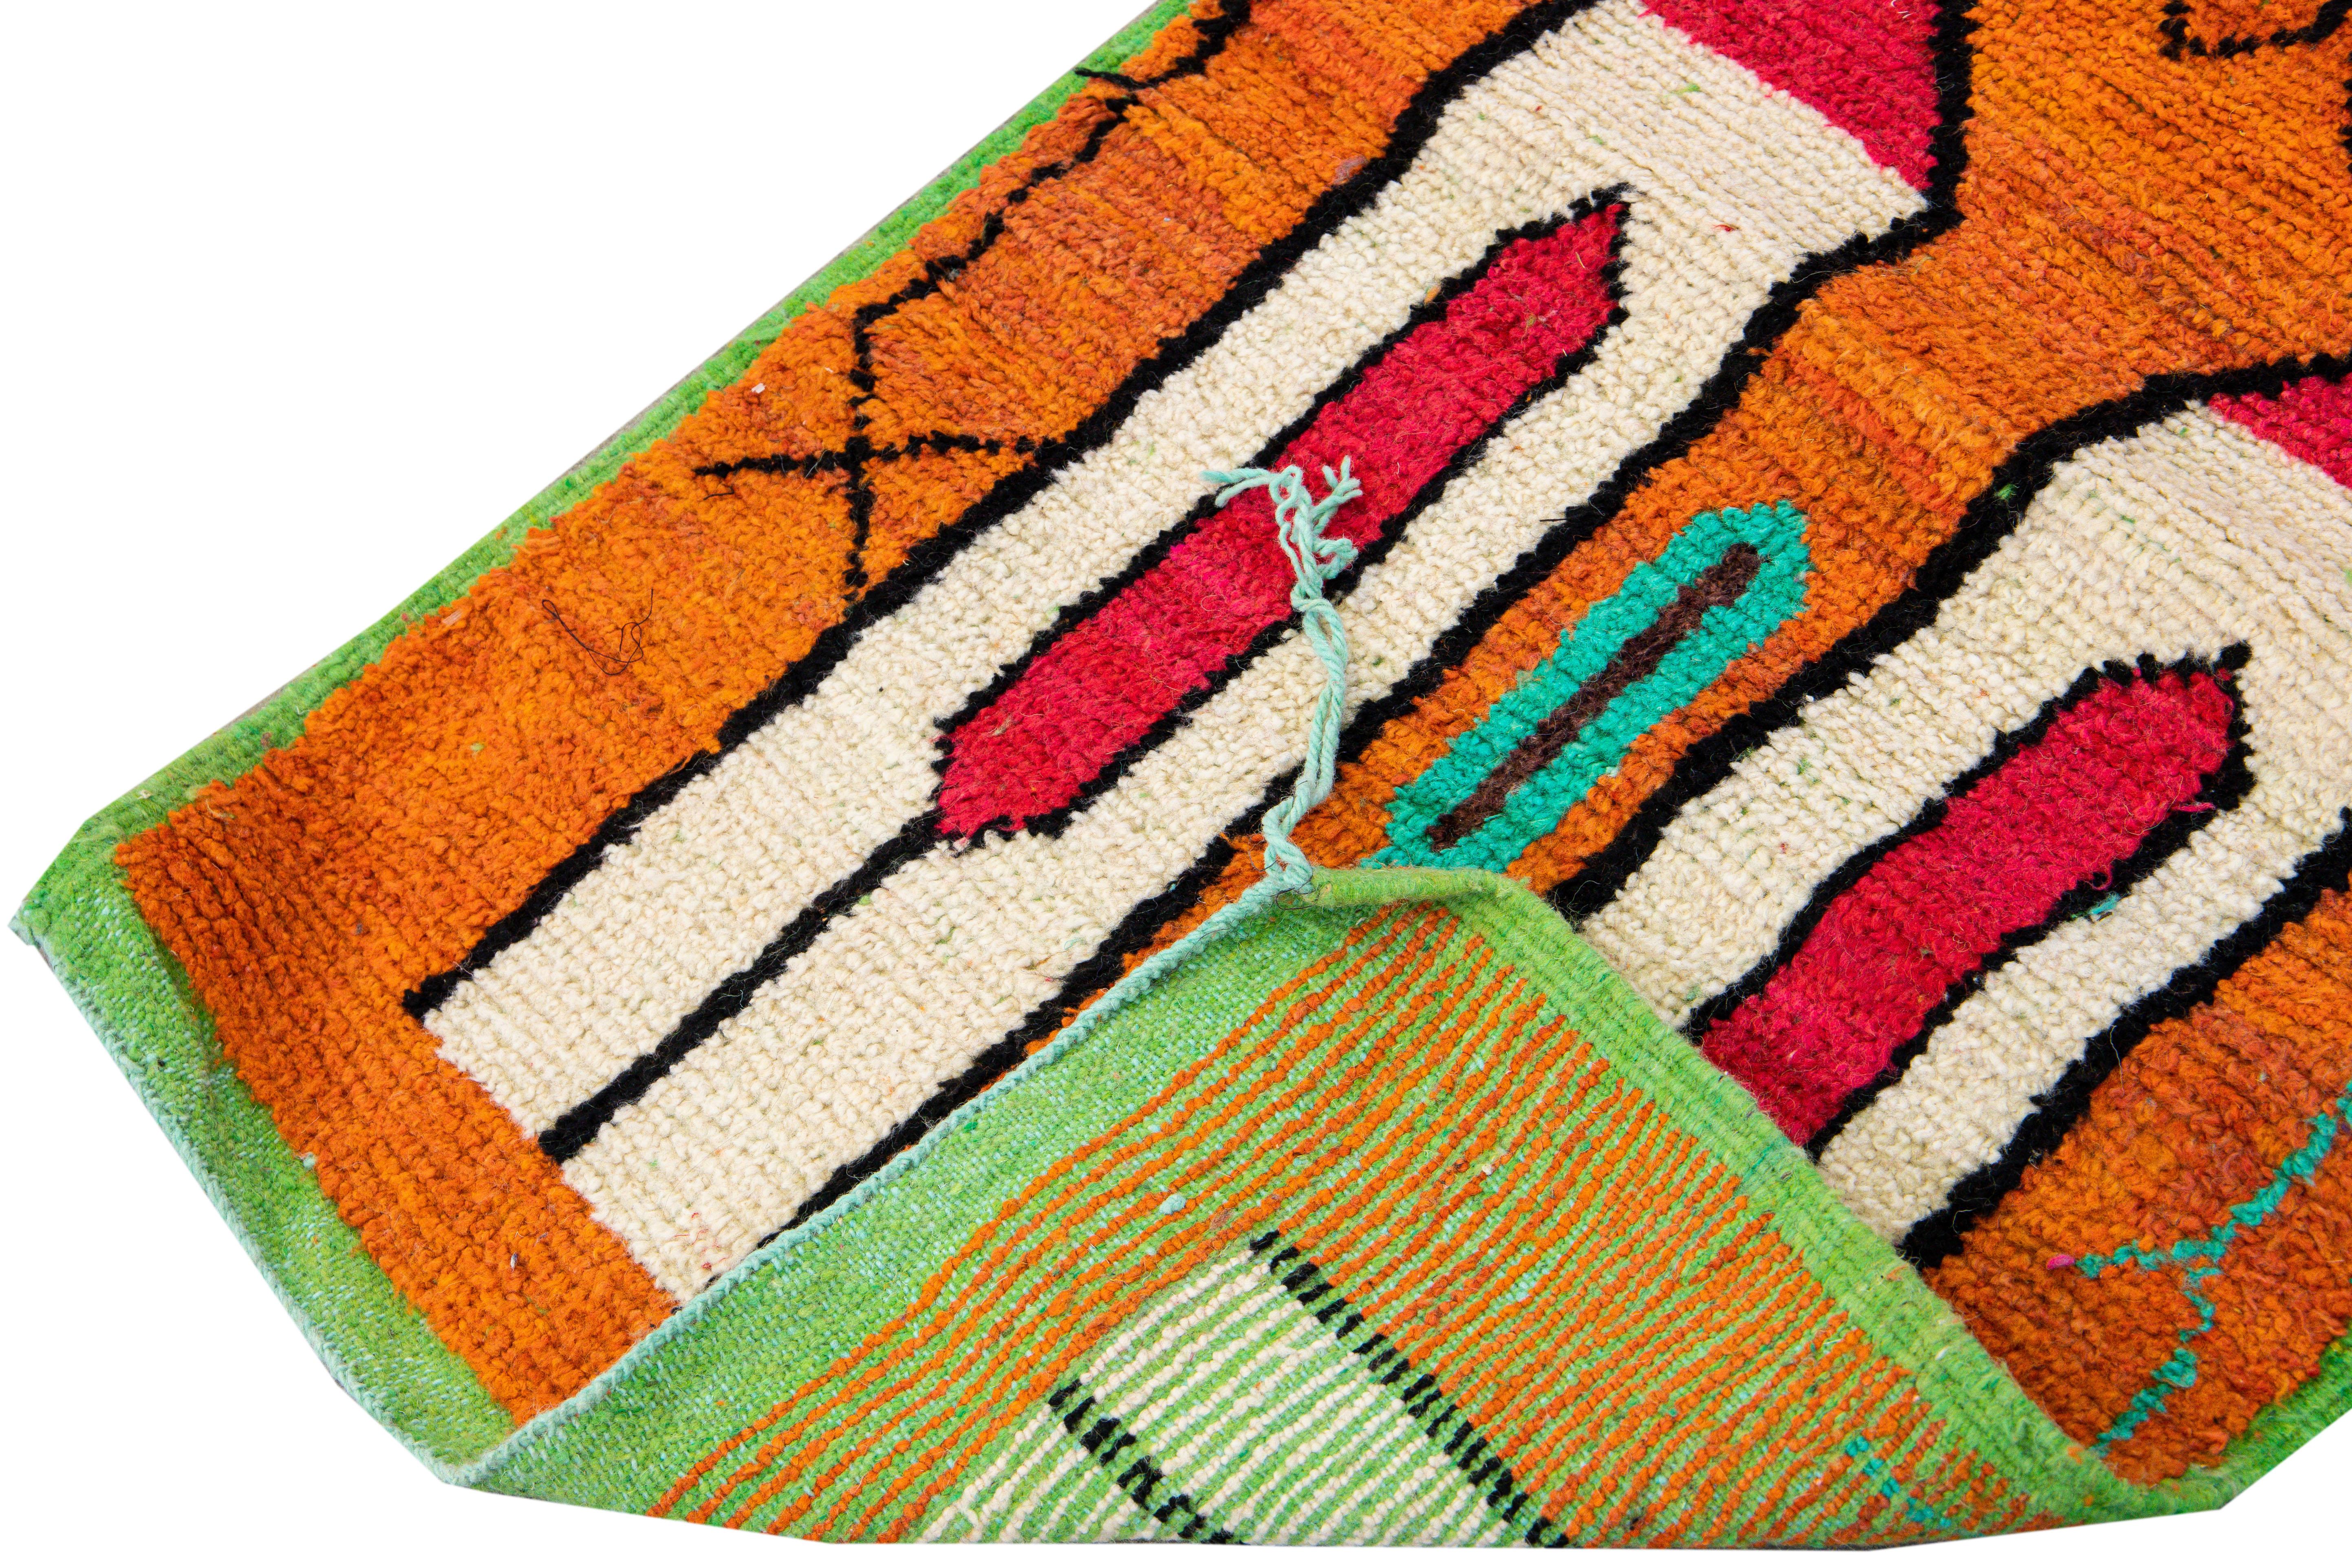 Beautiful vintage Boujad Moroccan hand-knotted wool rug with the orange and green field and accent. This Moroccan runner has bright multi-color accents and teal fringes in all-over multi patterns with different Berber symbols and geometric-based